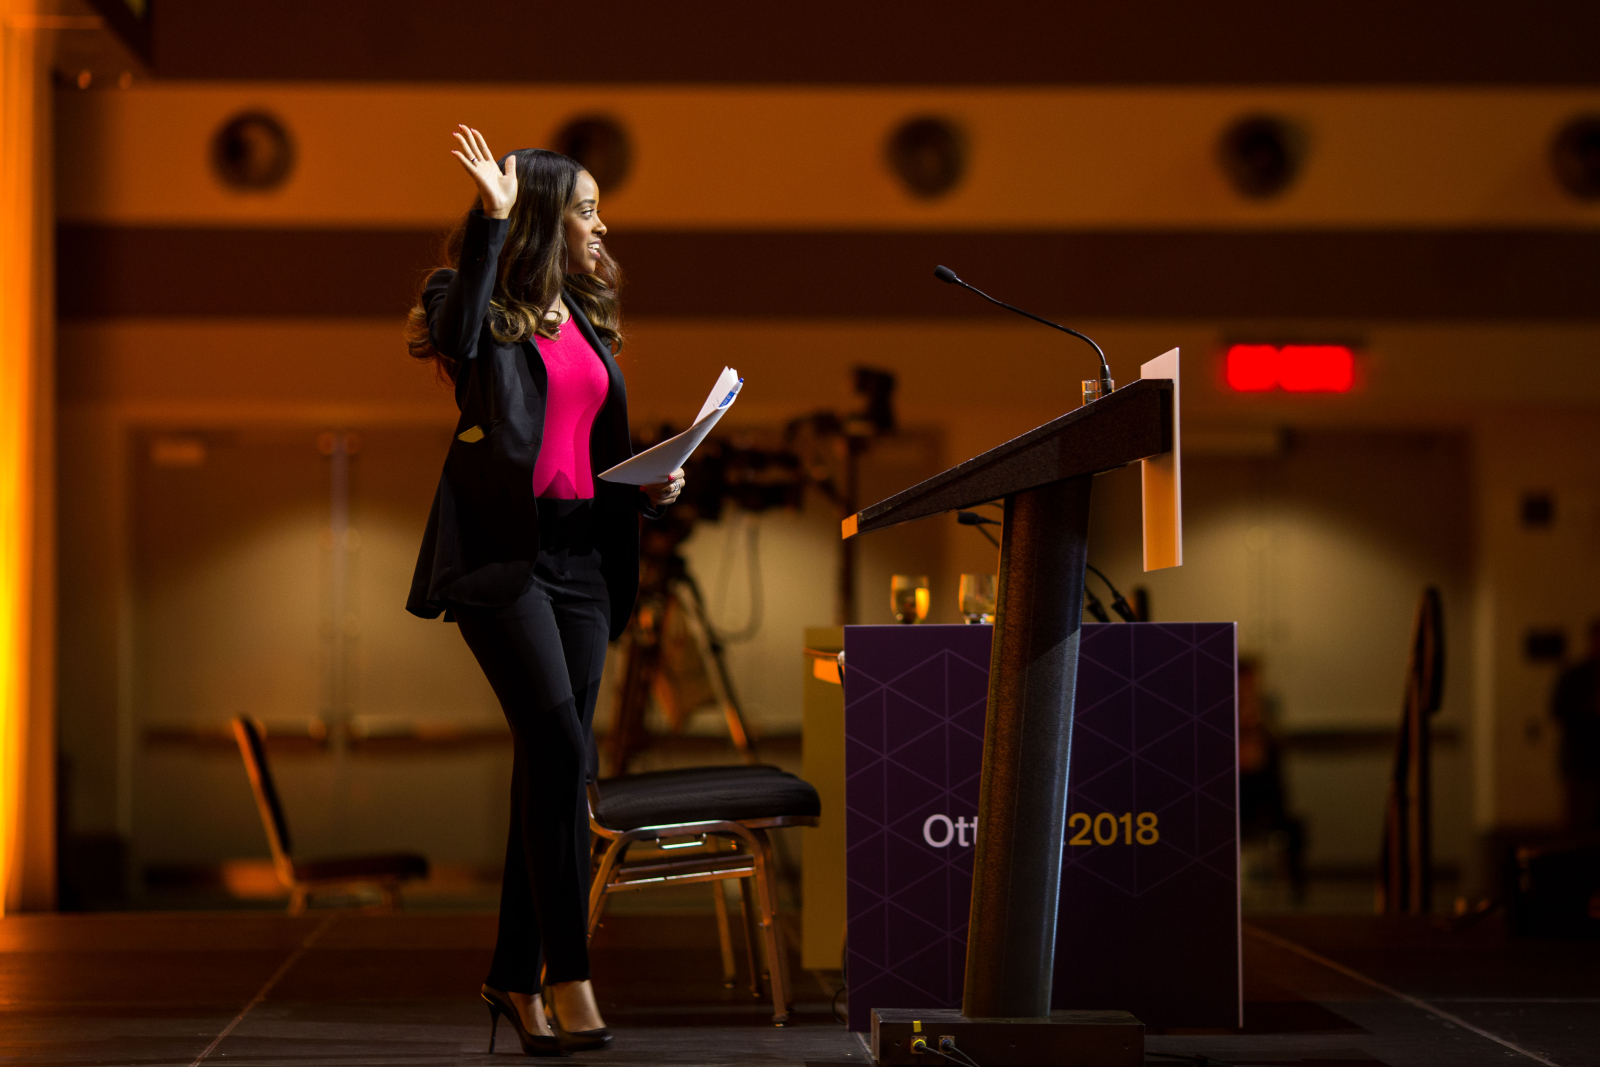 Women's March on Washington co-organizer Tamika Mallory was a keynote speaker during the NDP's national convention on Feb. 16, 2018. Photo by Alex Tétreault